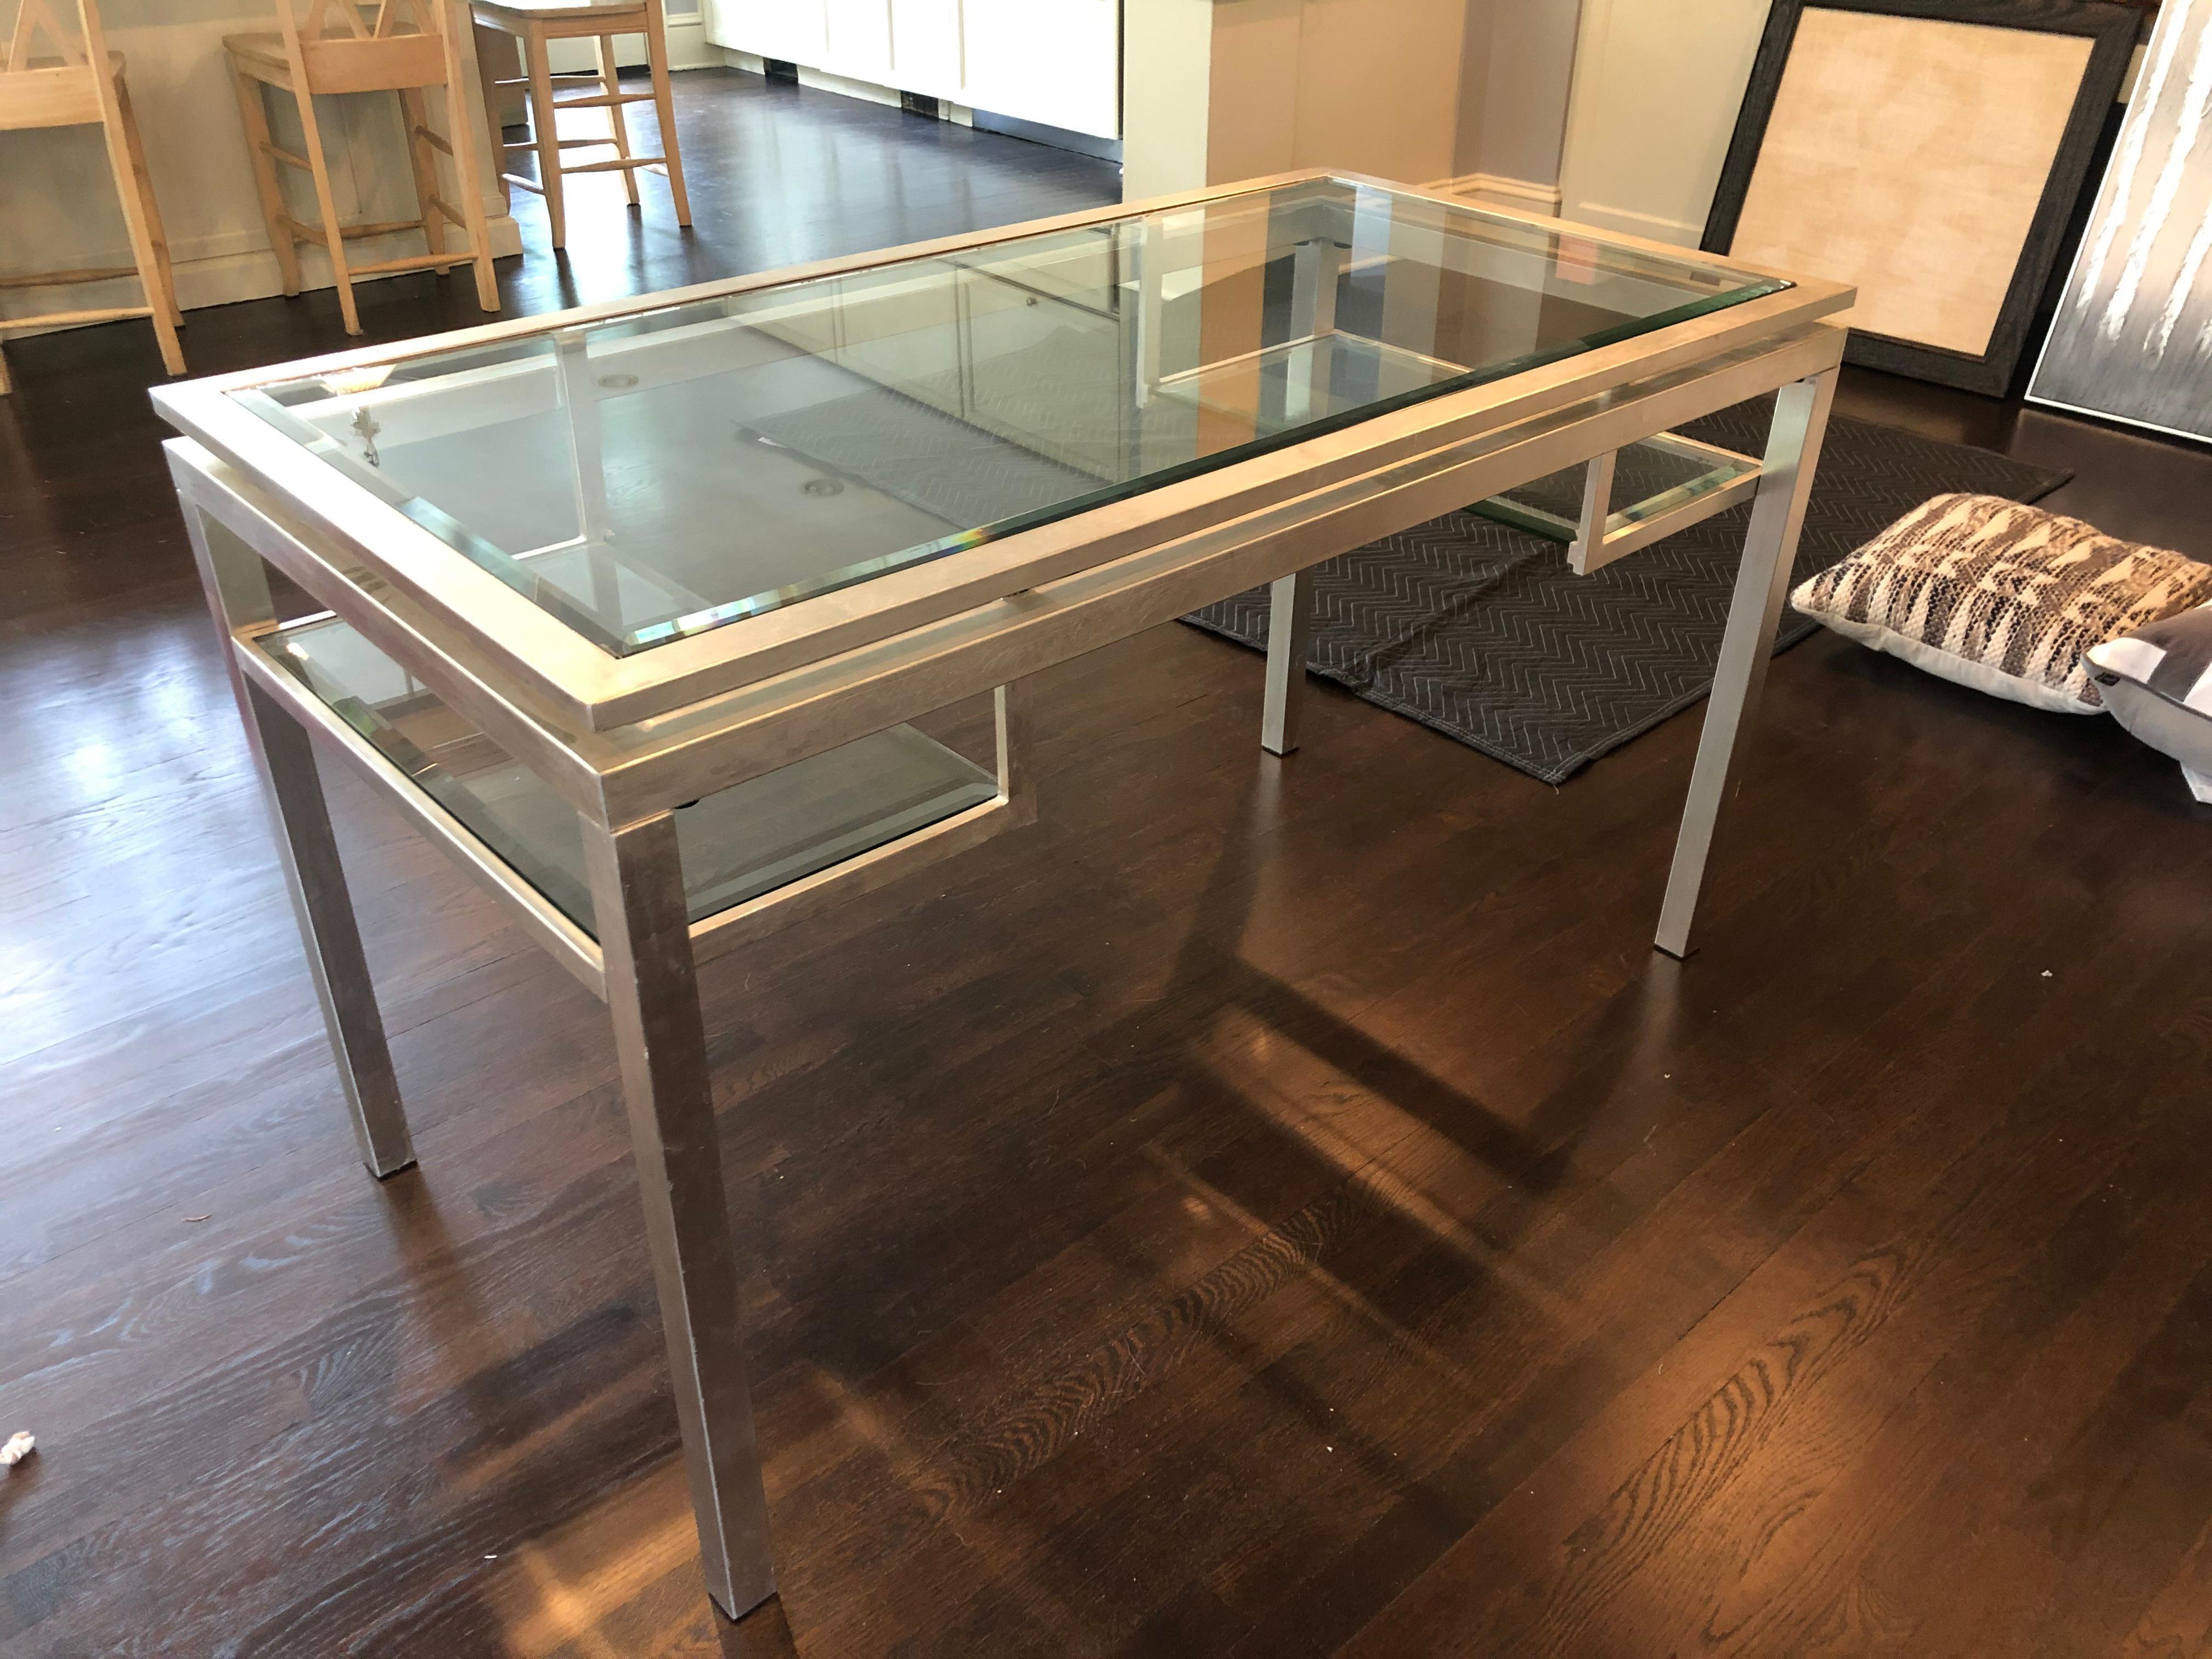 Silver leafed and bevelled glass glamorous contemporary writing desk having two open drawer shaped compartments underneath.